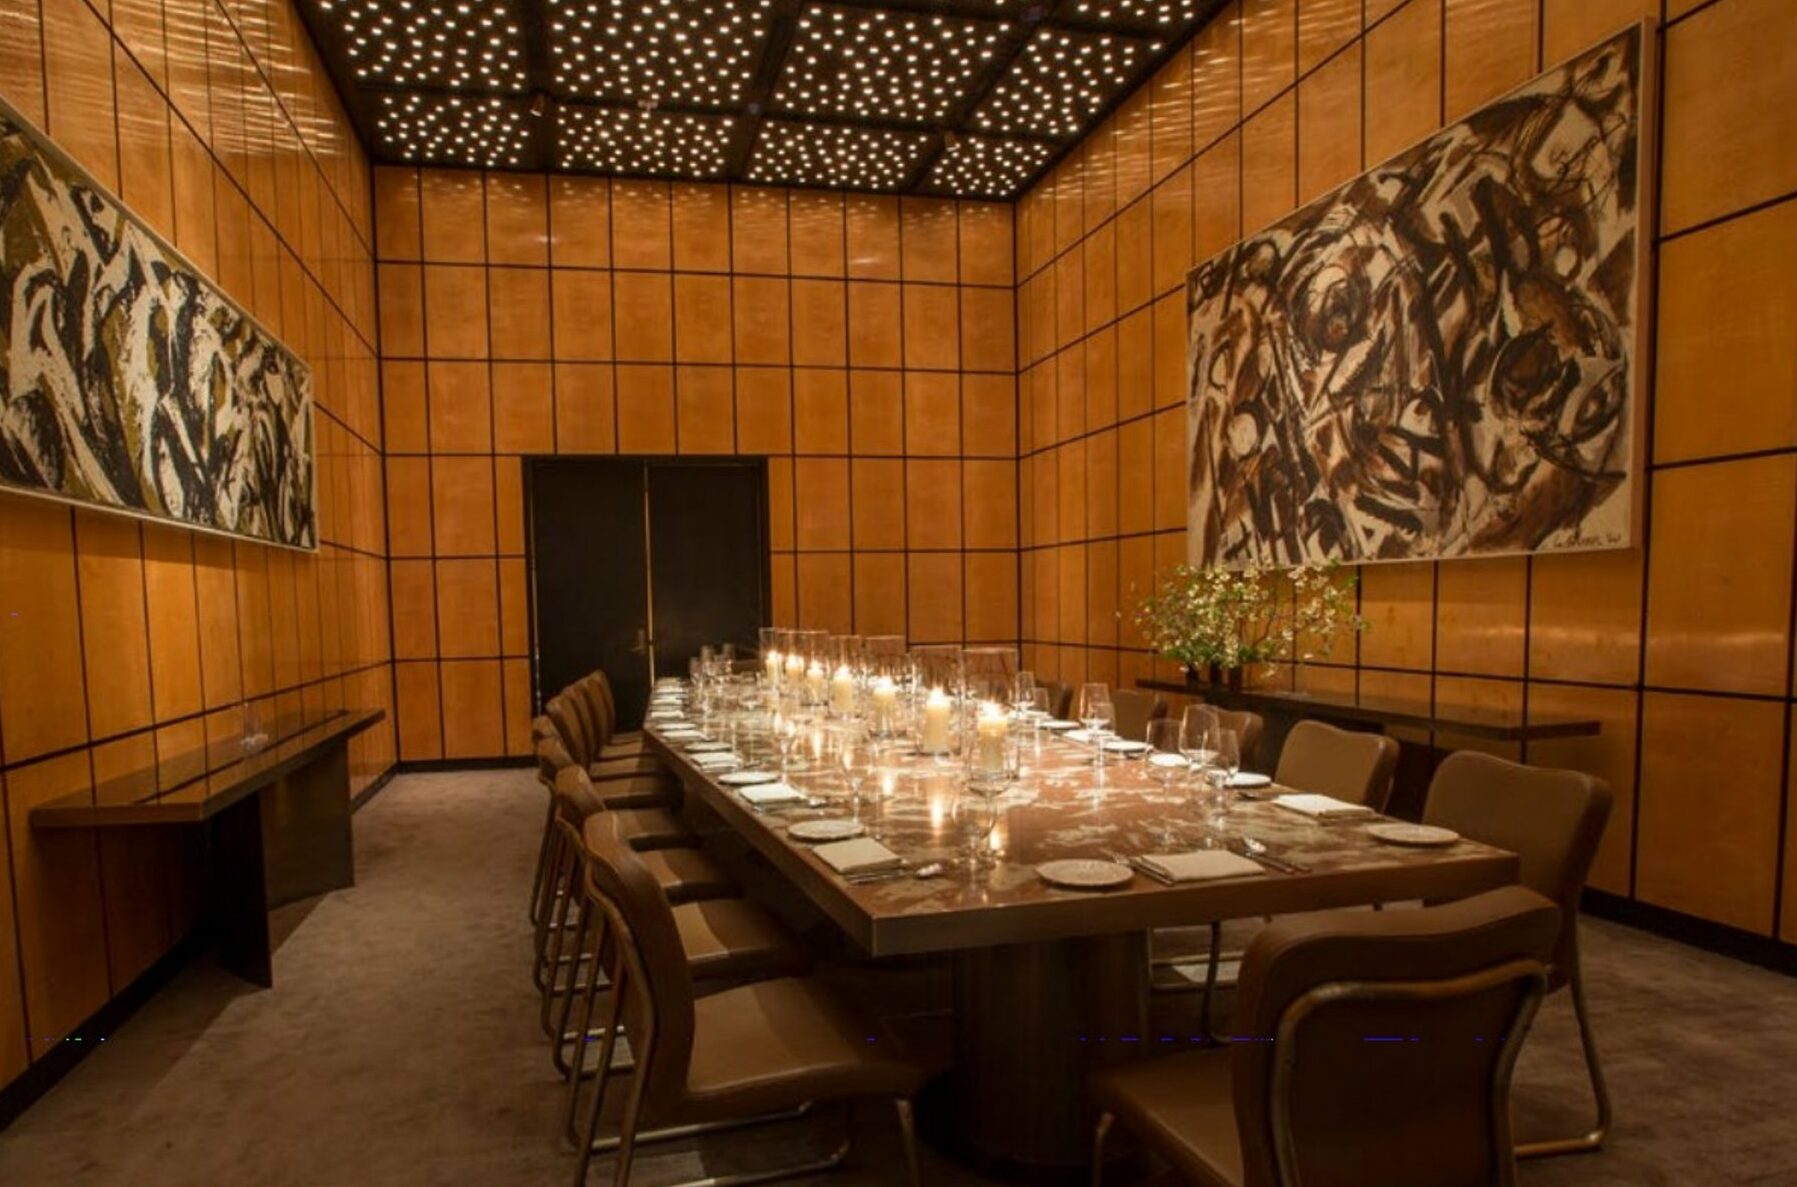 NYC Acclaimed Restaurant The Grill's private dining room with dim lighting